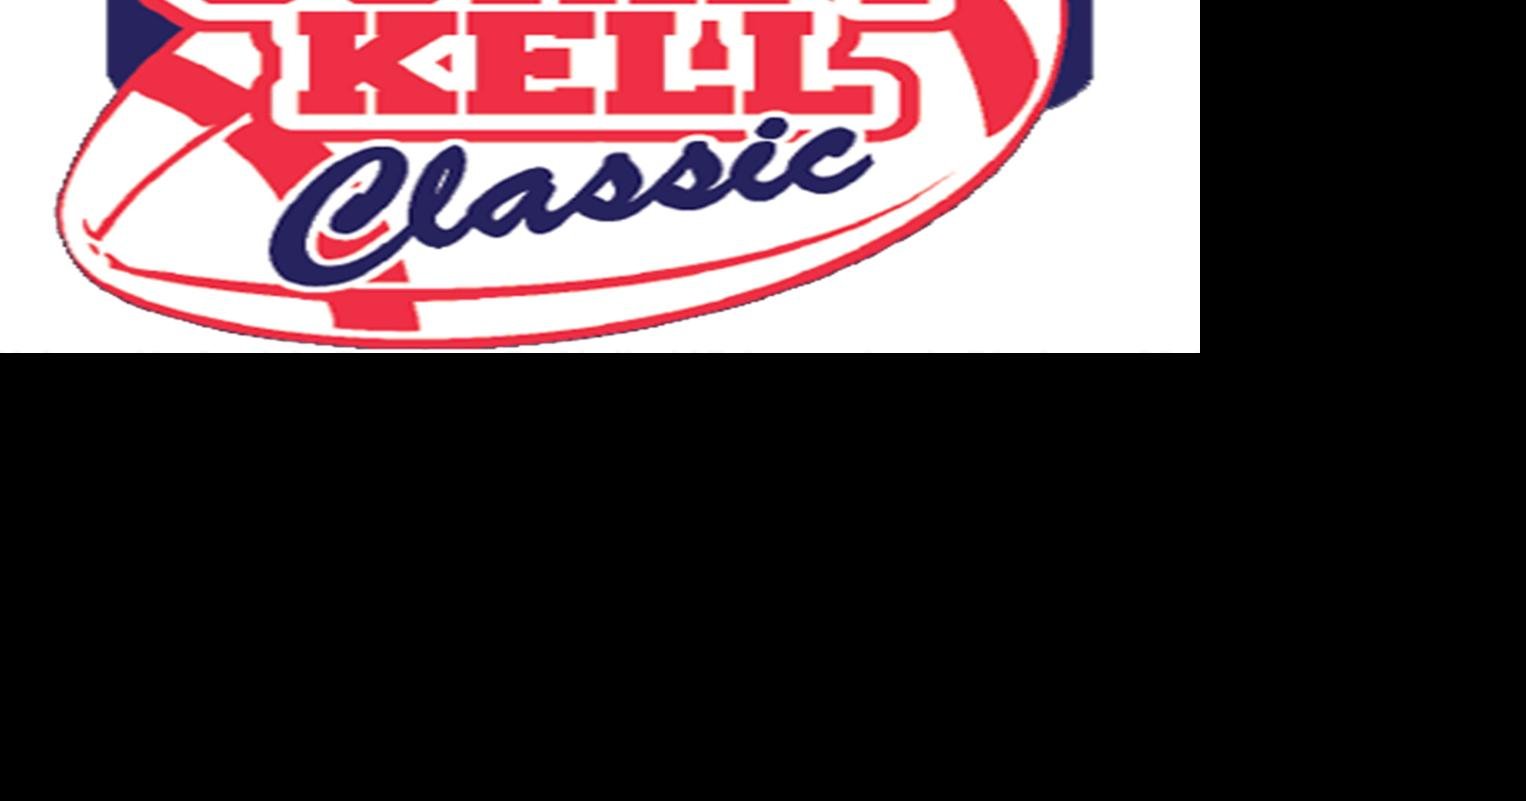 Corky Kell Classic schedule changes again Cobb Football Friday